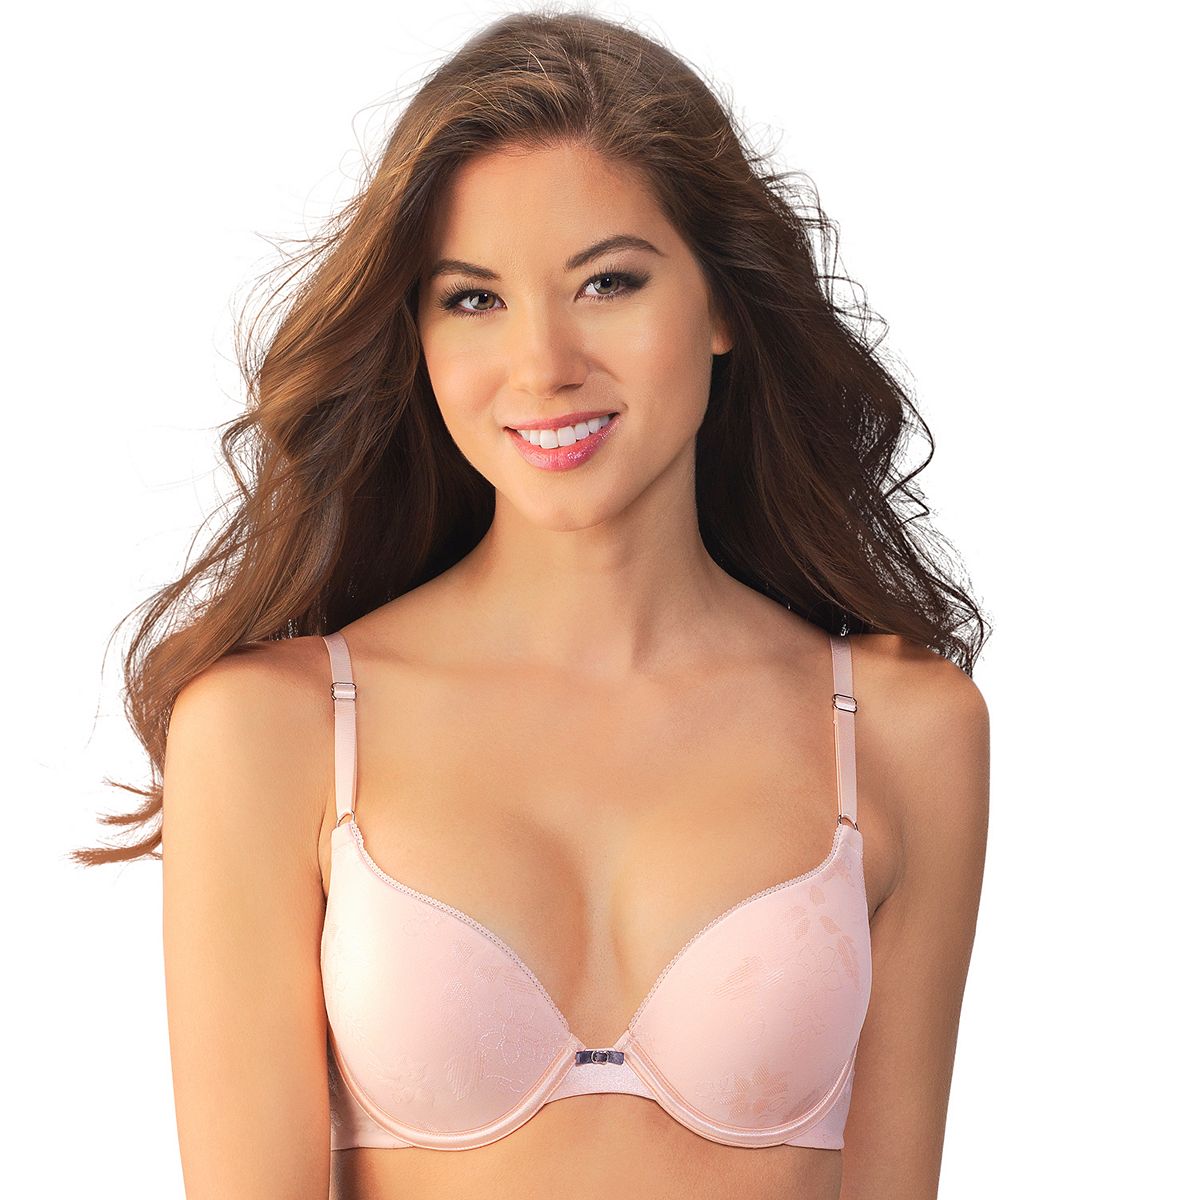 Buy Lily of France Women's Extreme Ego Boost Tailored Push-up Bra